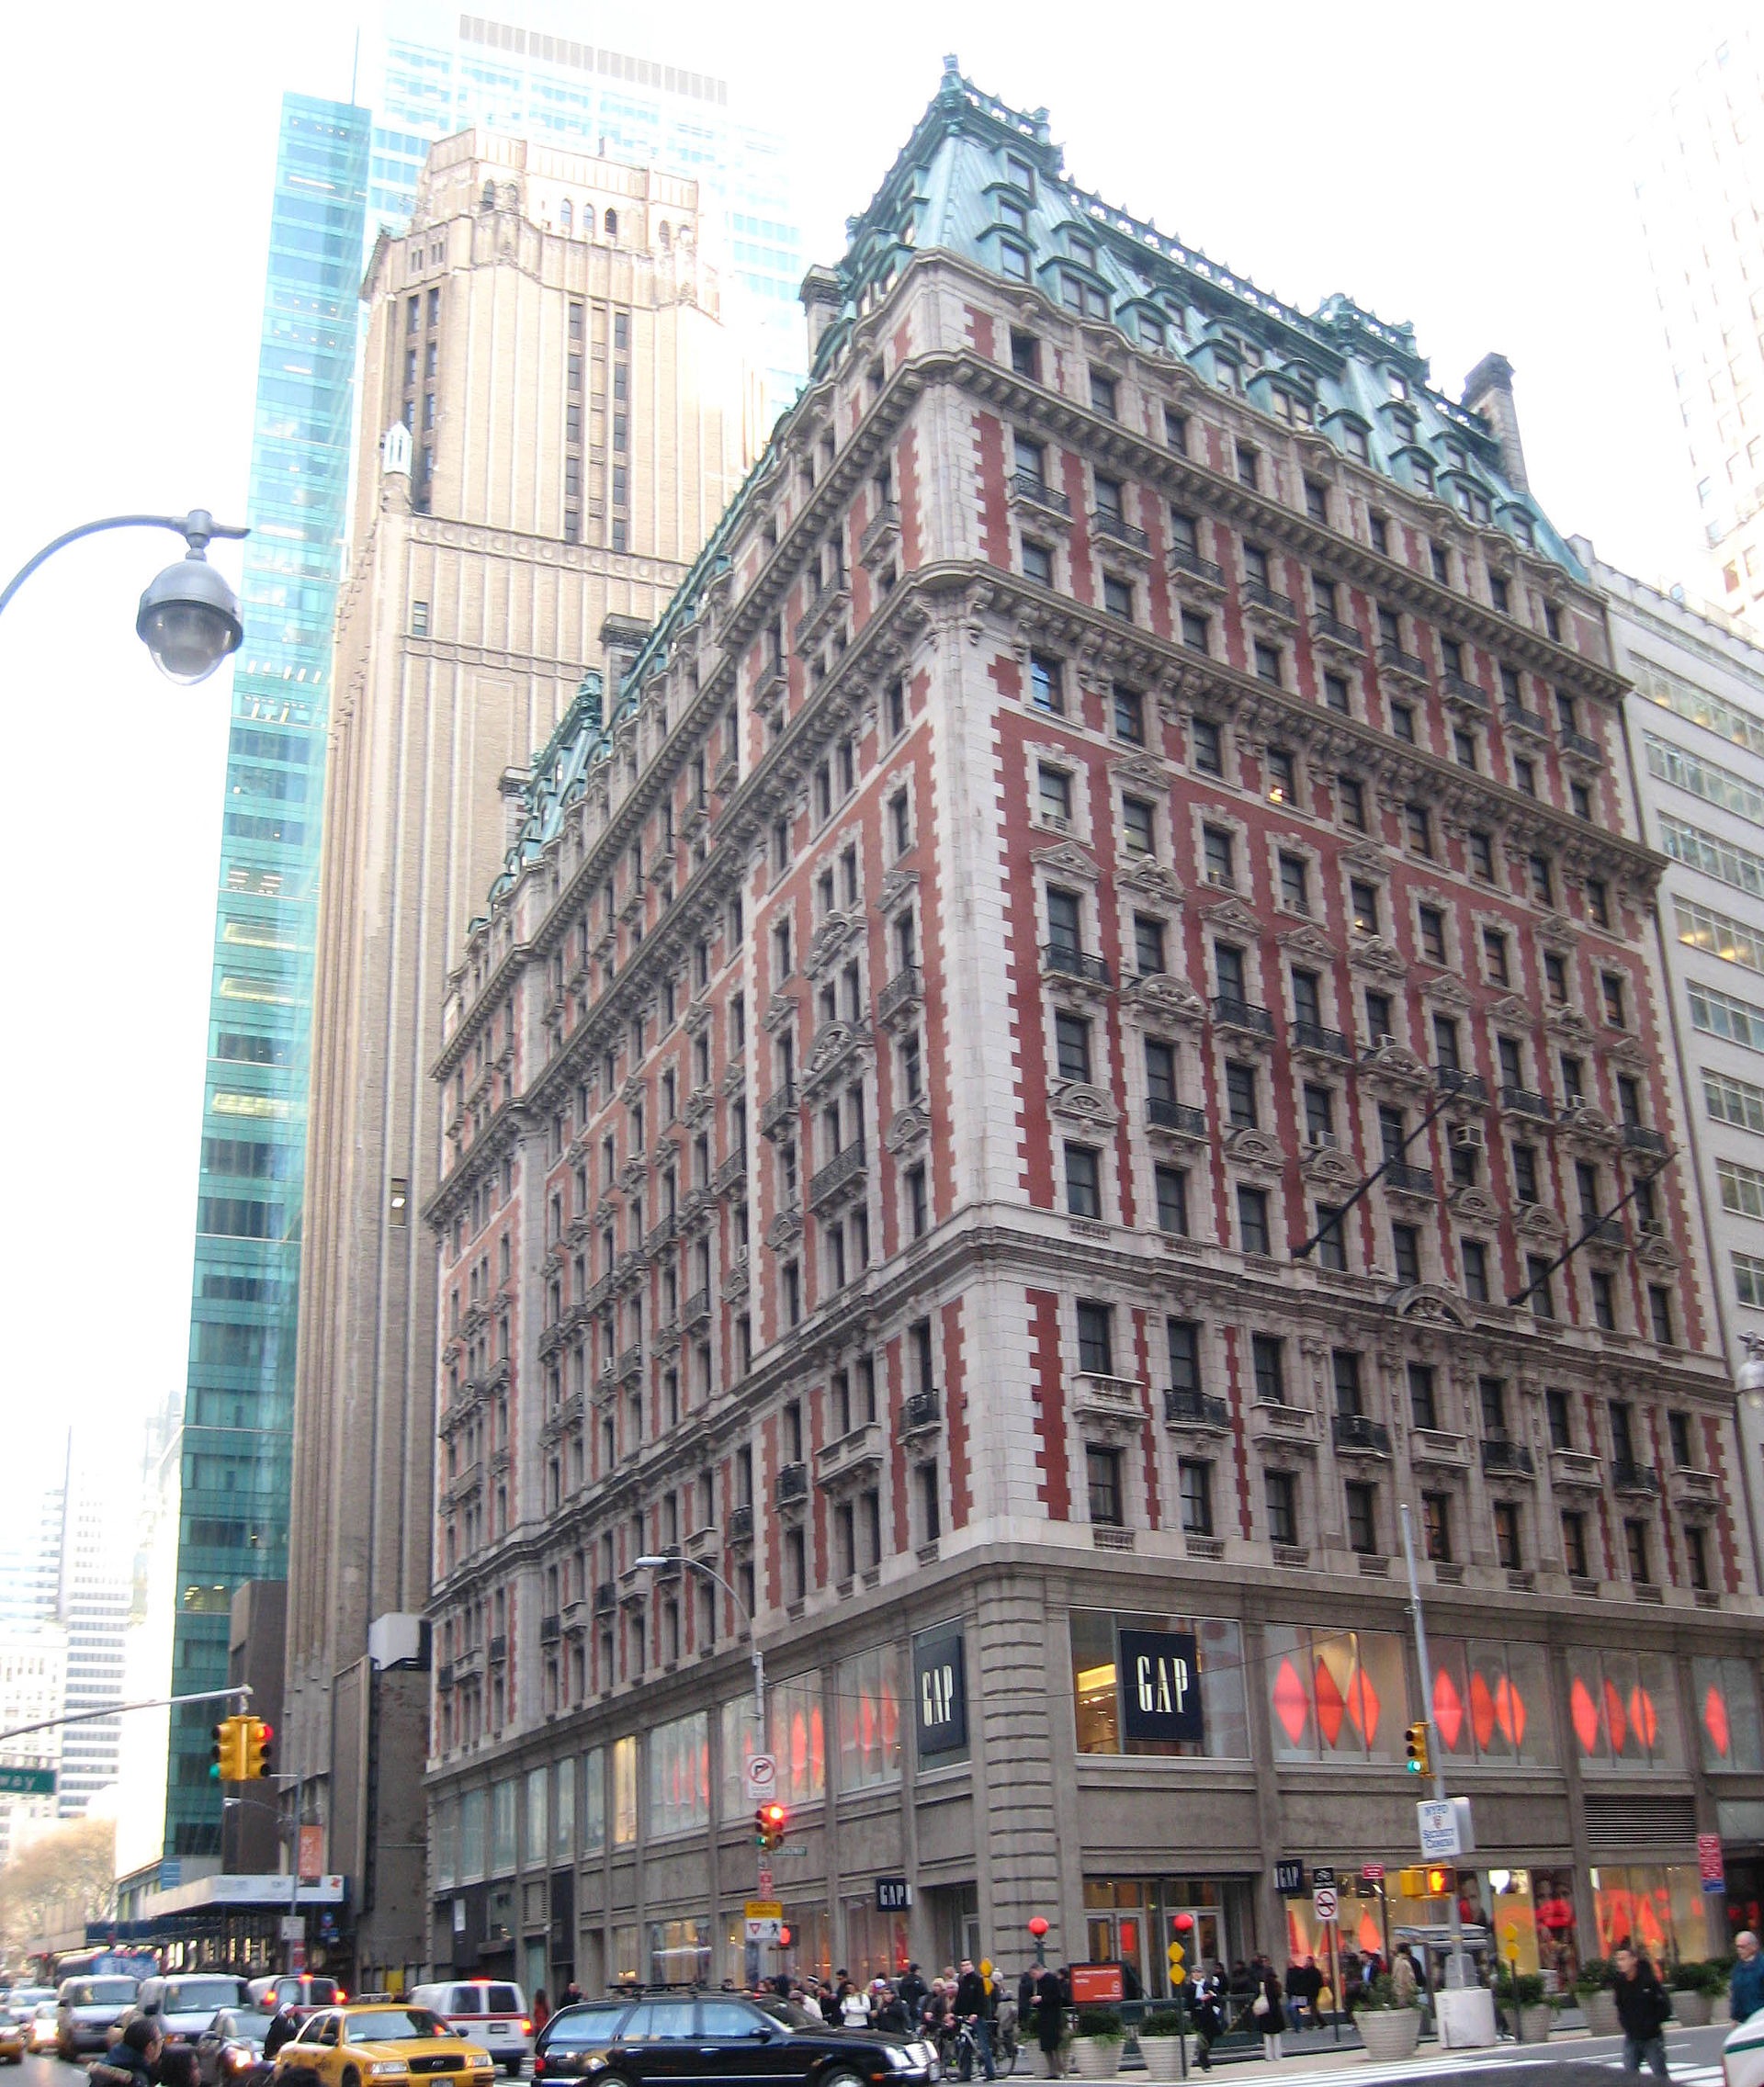 The 42nd Street (left) and Broadway (right) facades of the Knickerbocker Hotel